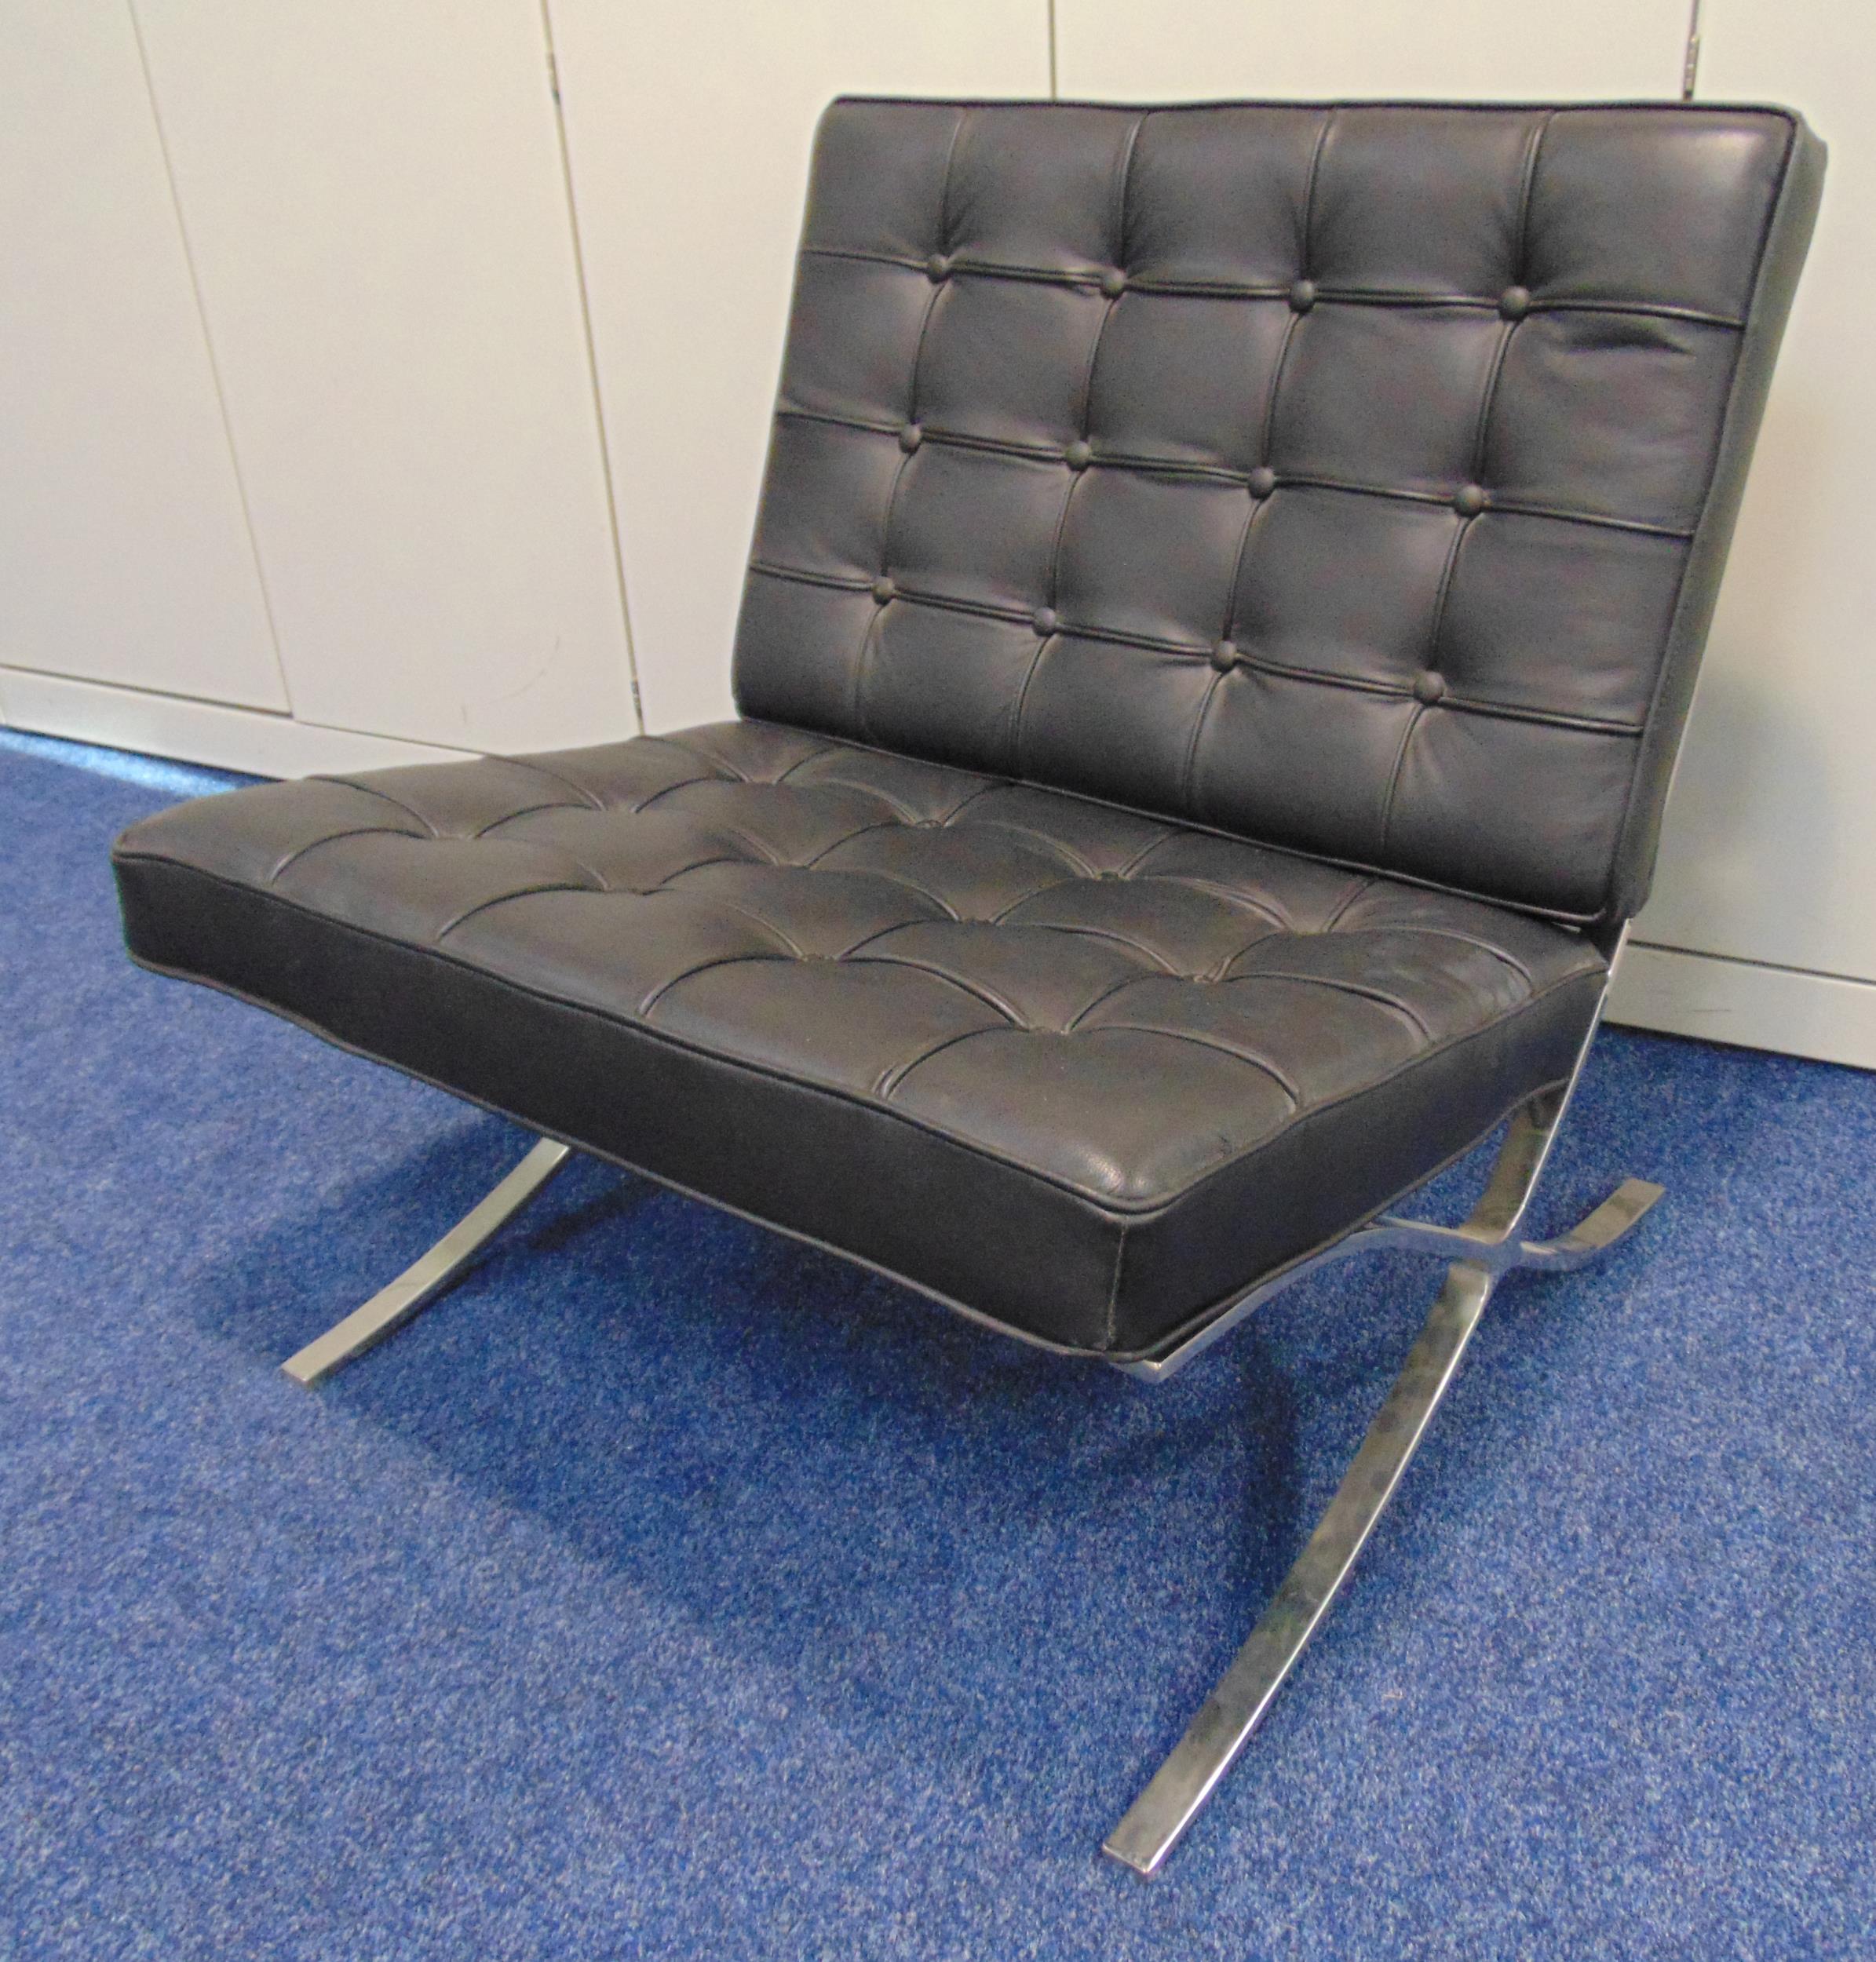 Barcelona style chair with leatherette seat and back